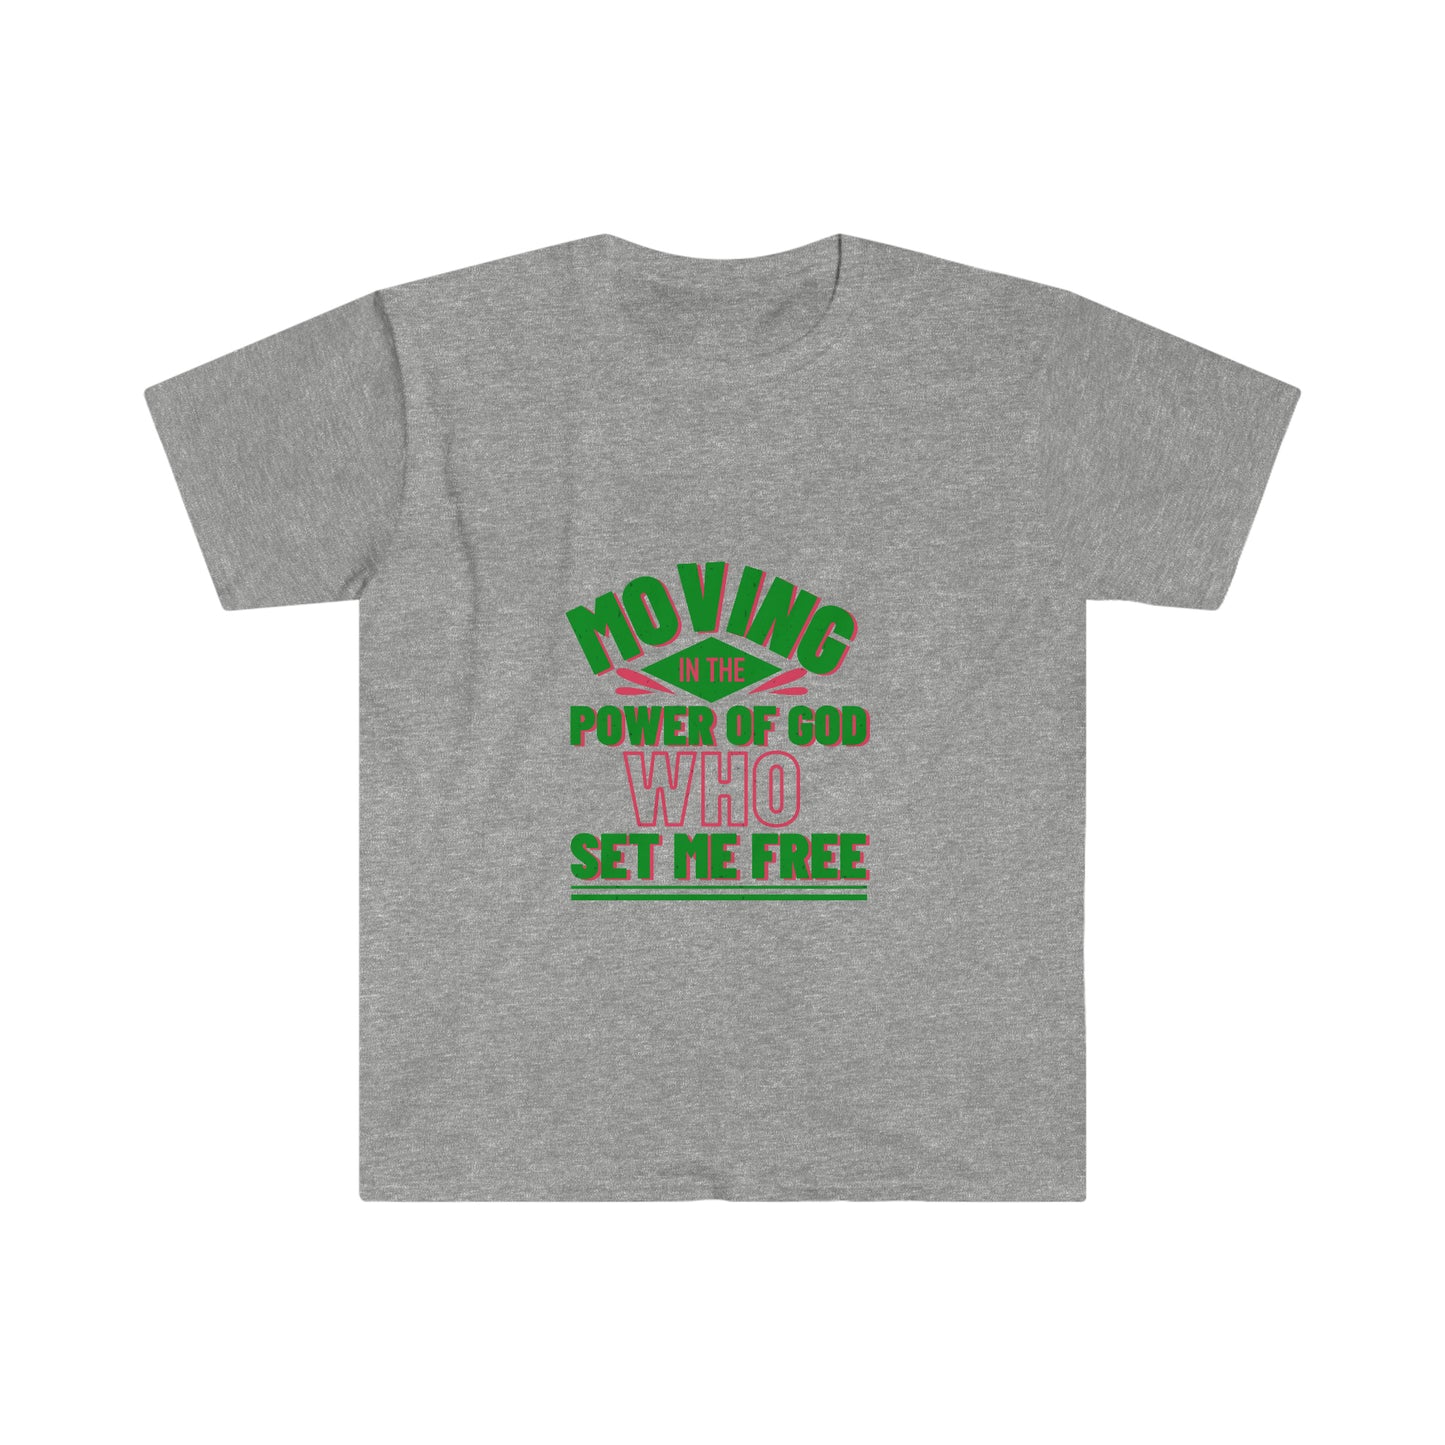 Moving In The Power Of God Who Set Me Free Unisex T-shirt